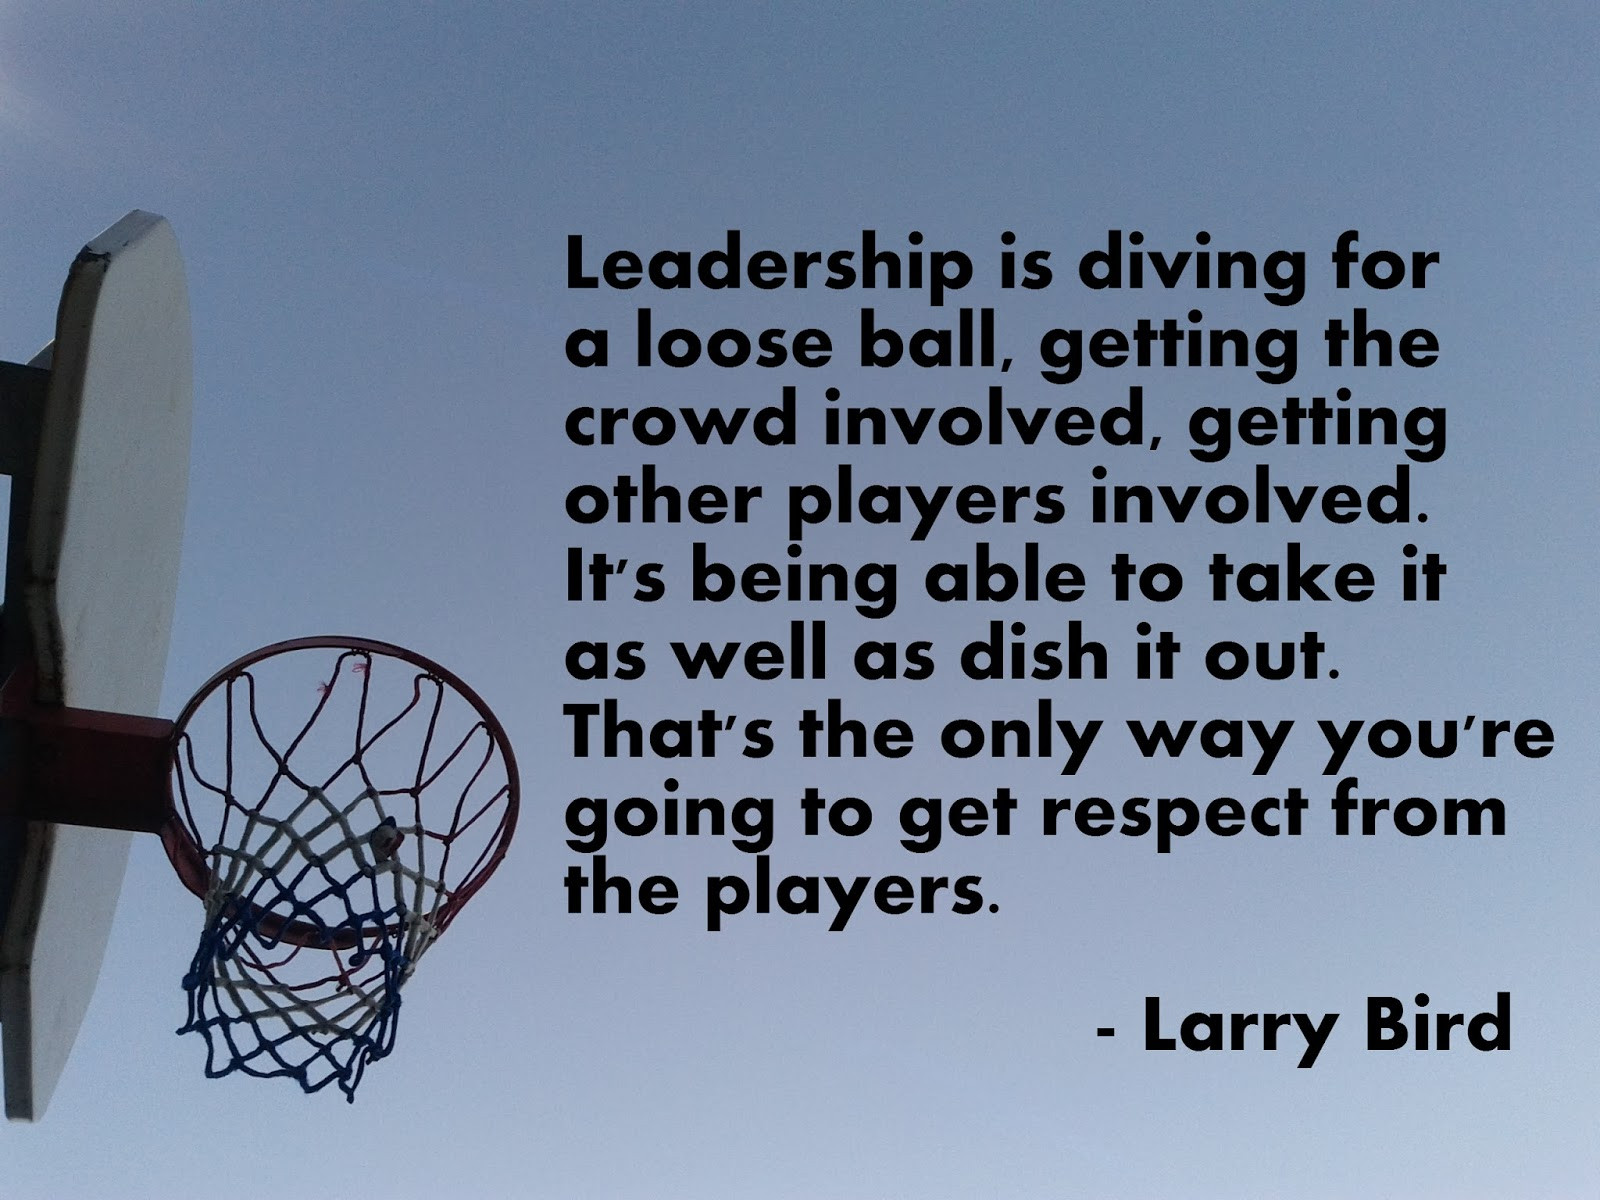 Basketball Motivational Quotes
 Motivational NBA Basketball Quotes with pictures and images